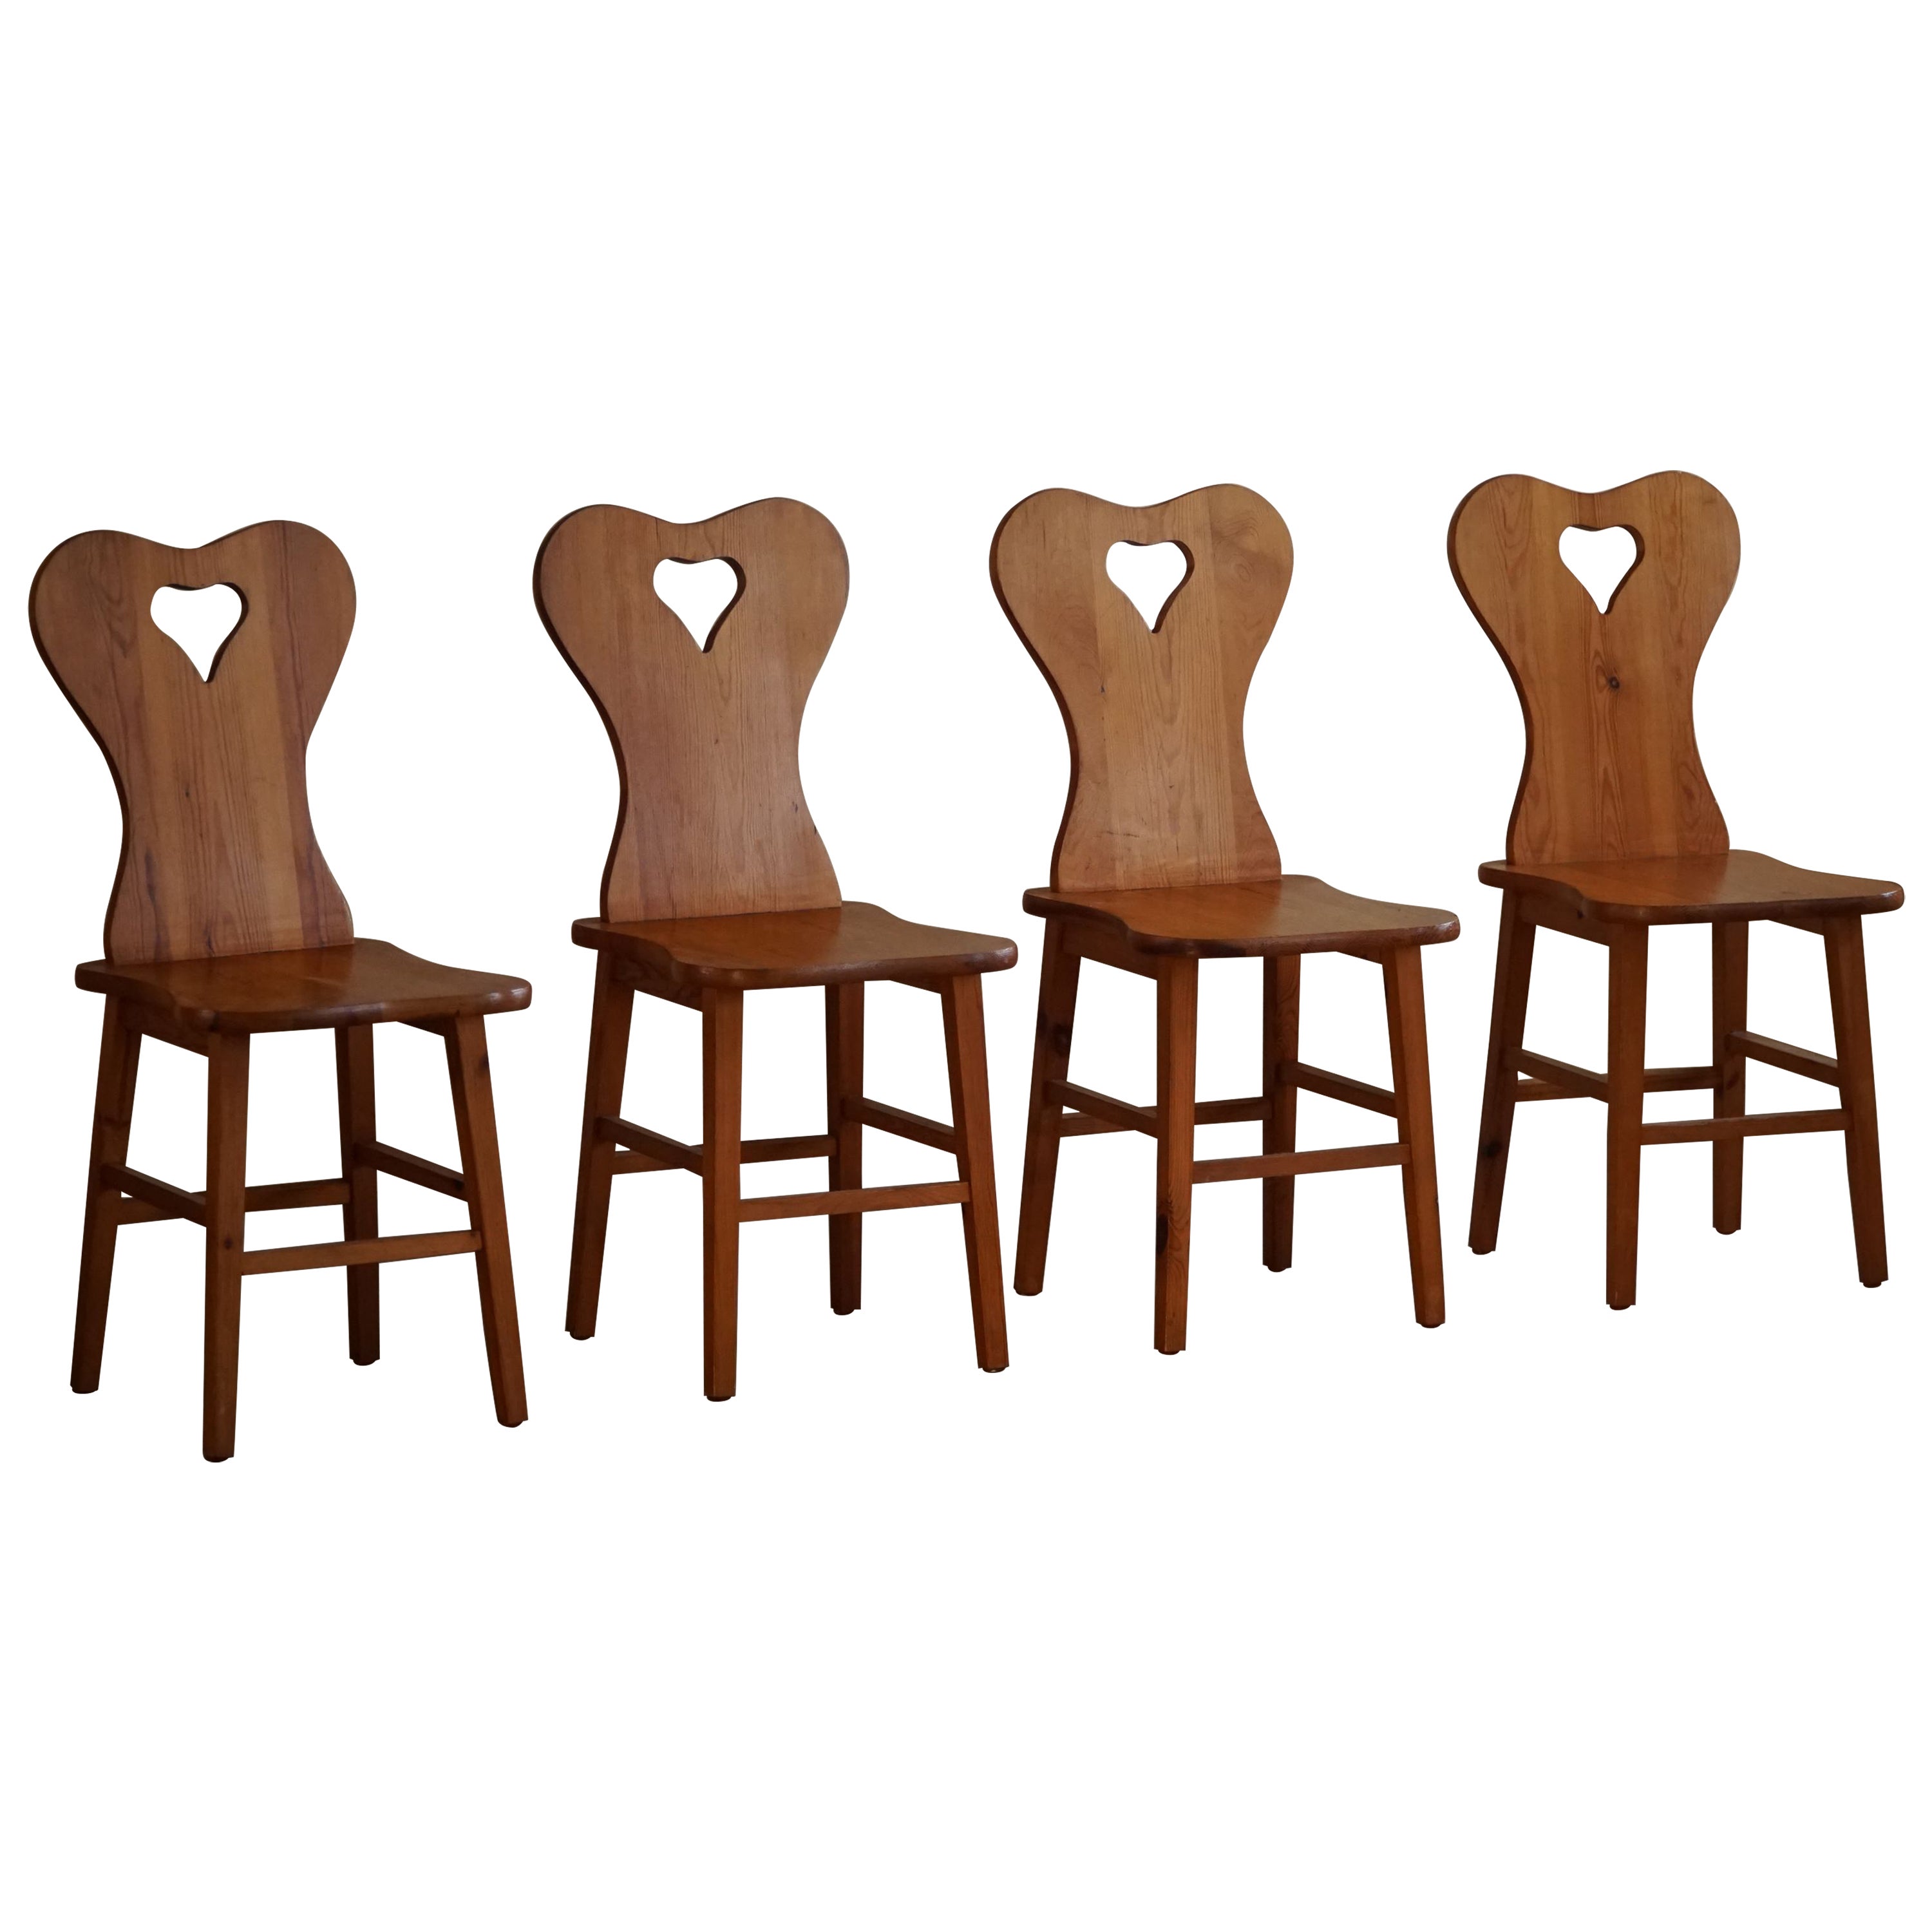 Set of 4 Chairs in Pine, by a Swedish Cabinetmaker, Scandinavian Modern, 1960s For Sale